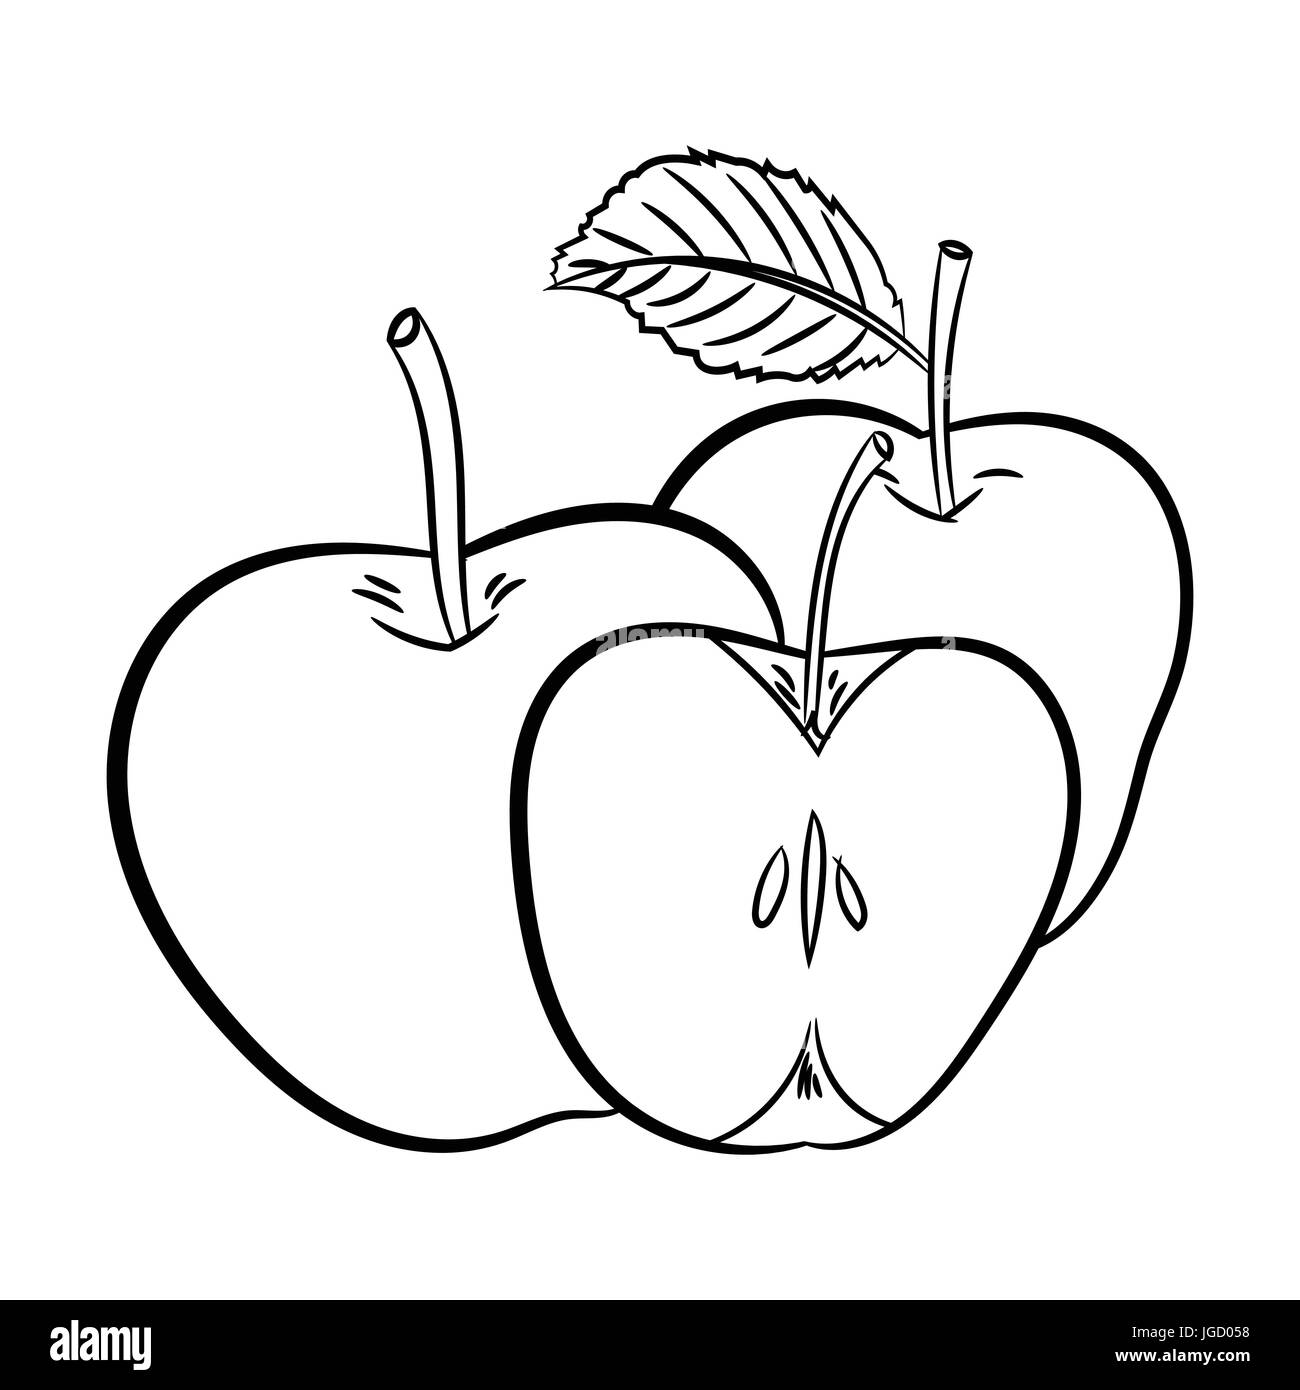 Hand drawn sketch of Apples isolated, Black and White Cartoon Vector Illustration for Coloring Book - Line Drawn Vector Stock Vector